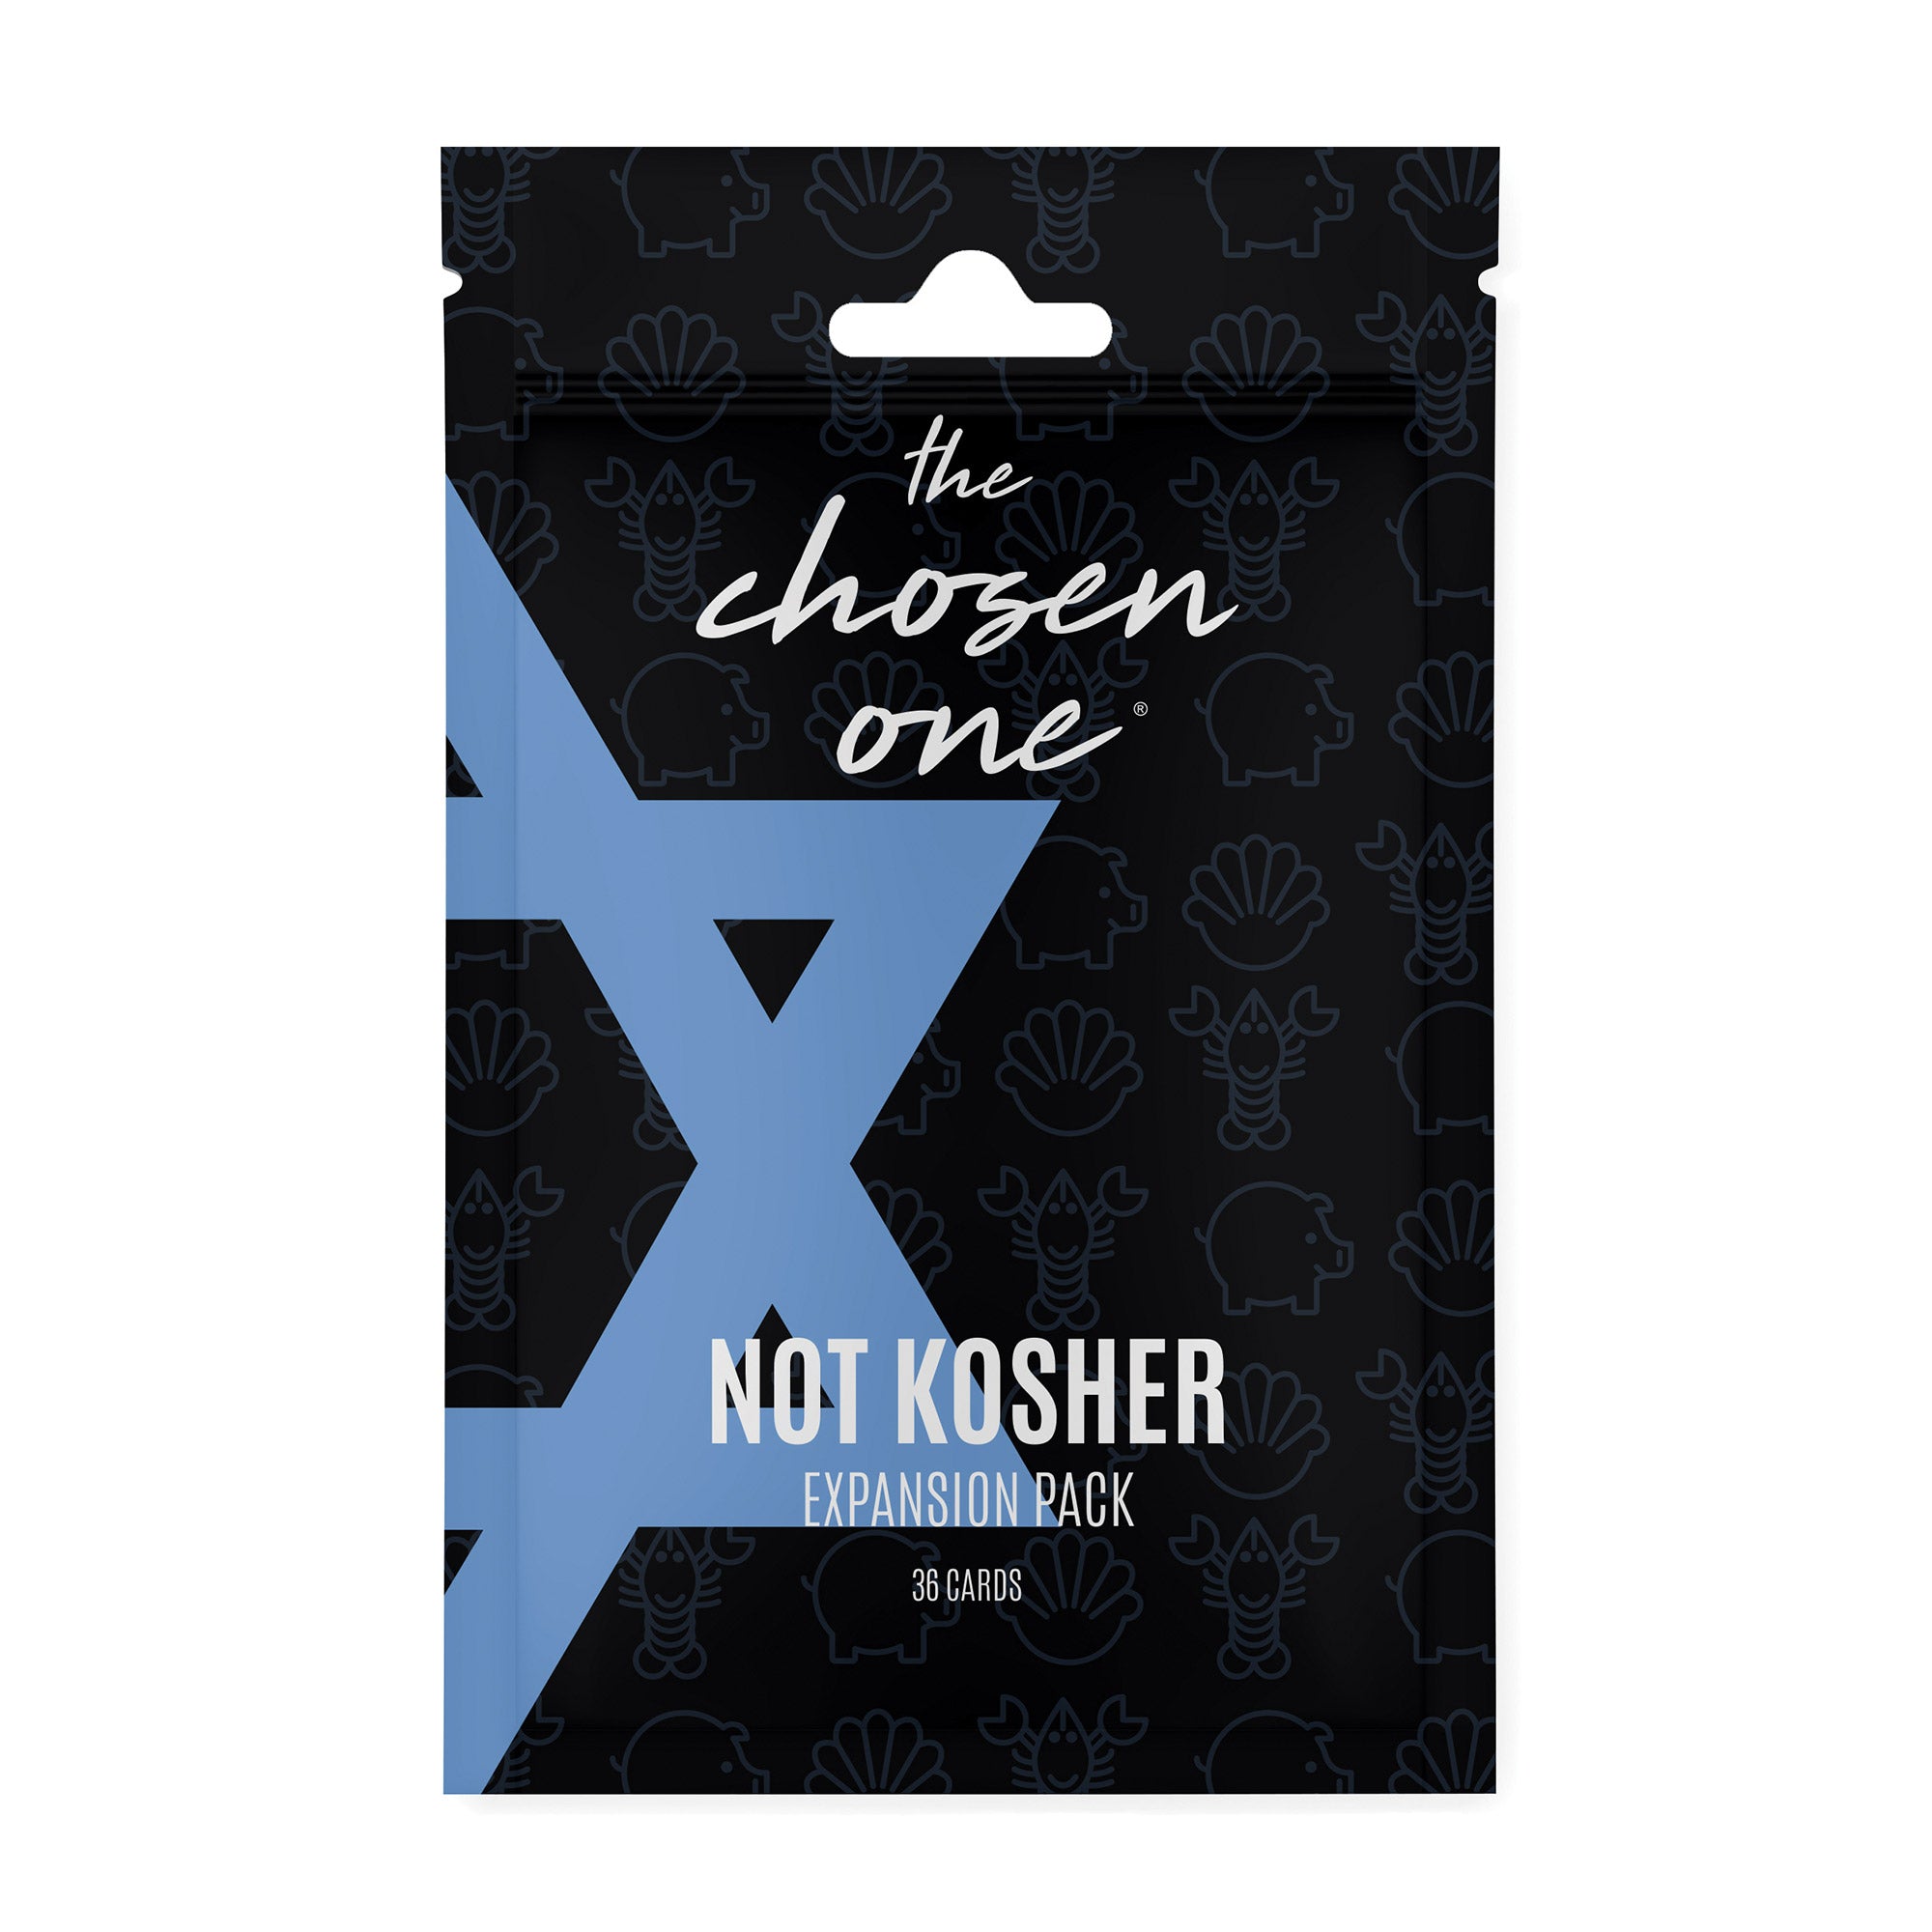 The Chosen One® - Not Kosher Expansion Pack